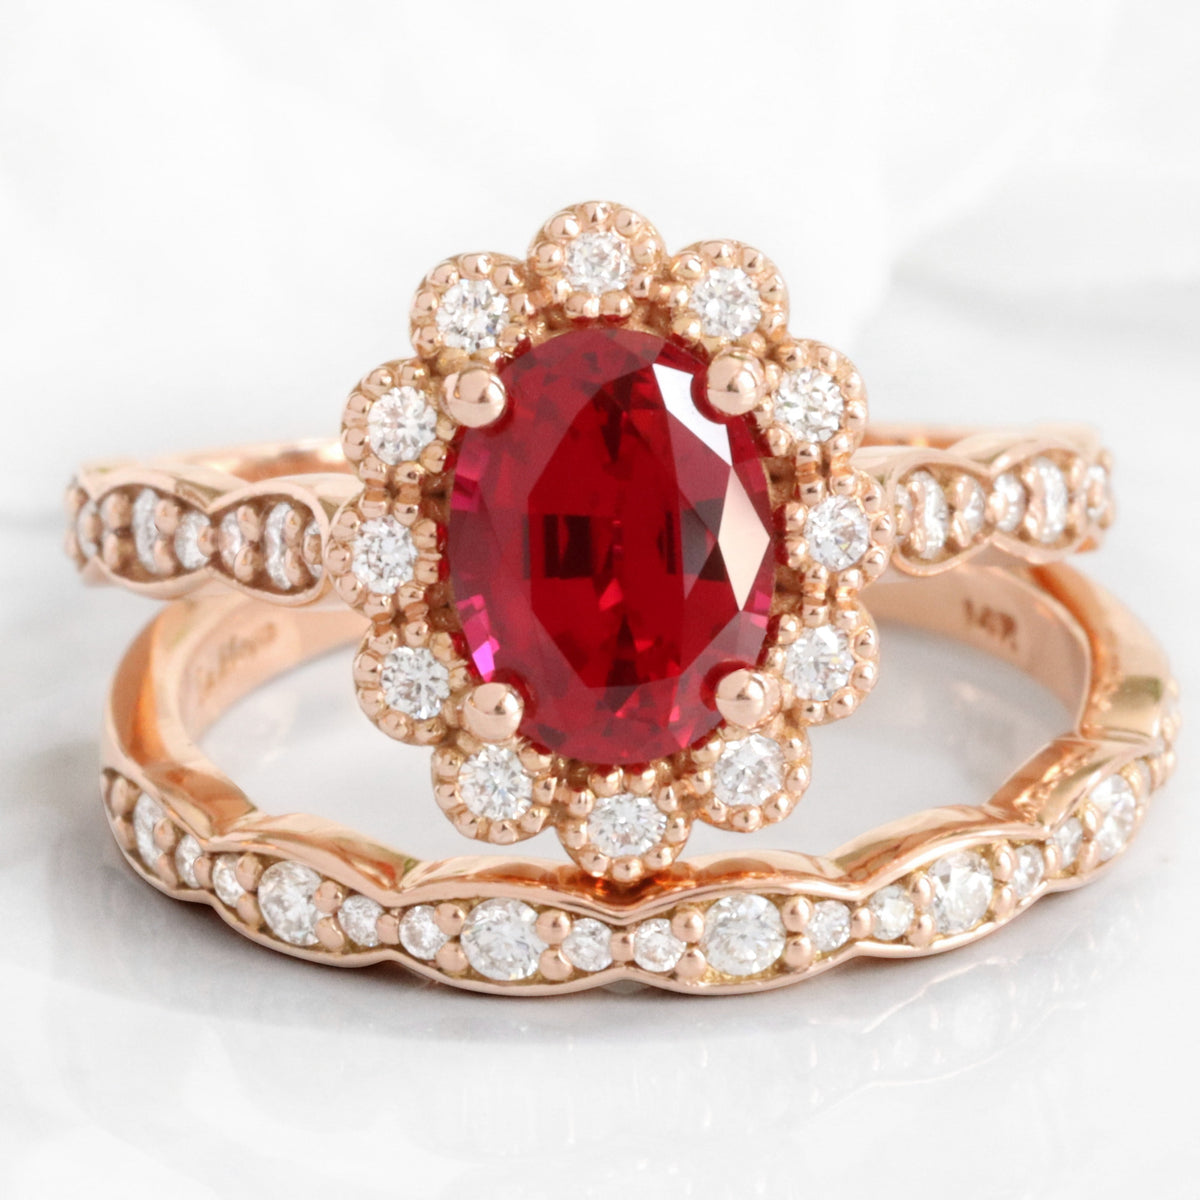 Oval ruby engagement ring bridal set rose gold vintage halo diamond ruby ring stack la more design jewelry